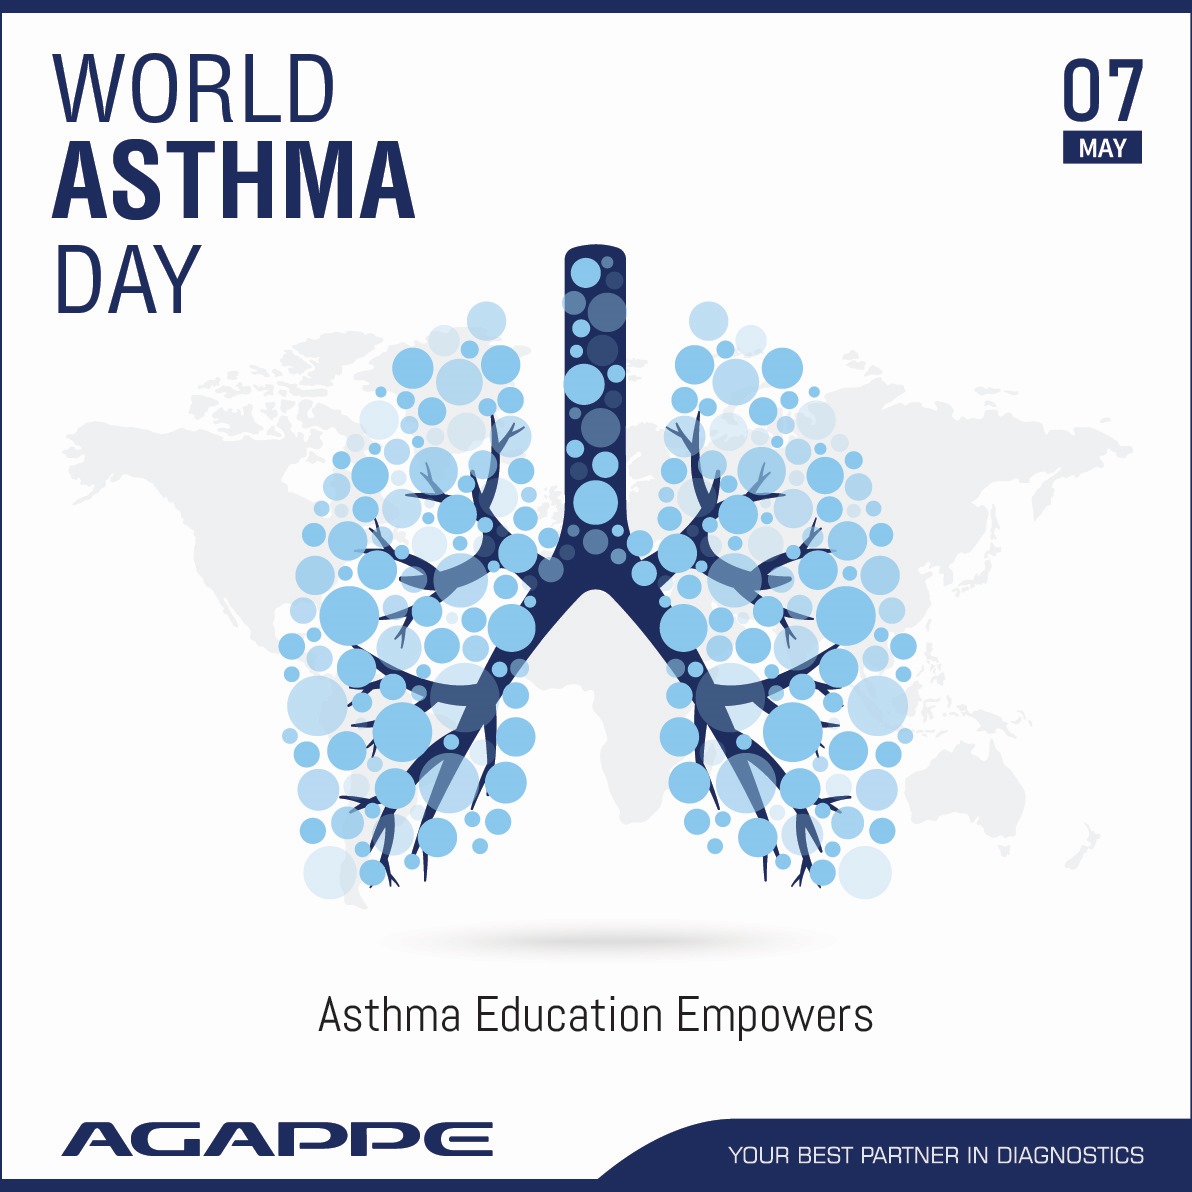 World Asthma Day!

Asthma Education Empowers!

Understanding triggers, meds, & inhaler techniques makes a difference. Let's ensure everyone breathes easier. 

 #agappe #WorldAsthmaDay #AsthmaEducationEmpowers